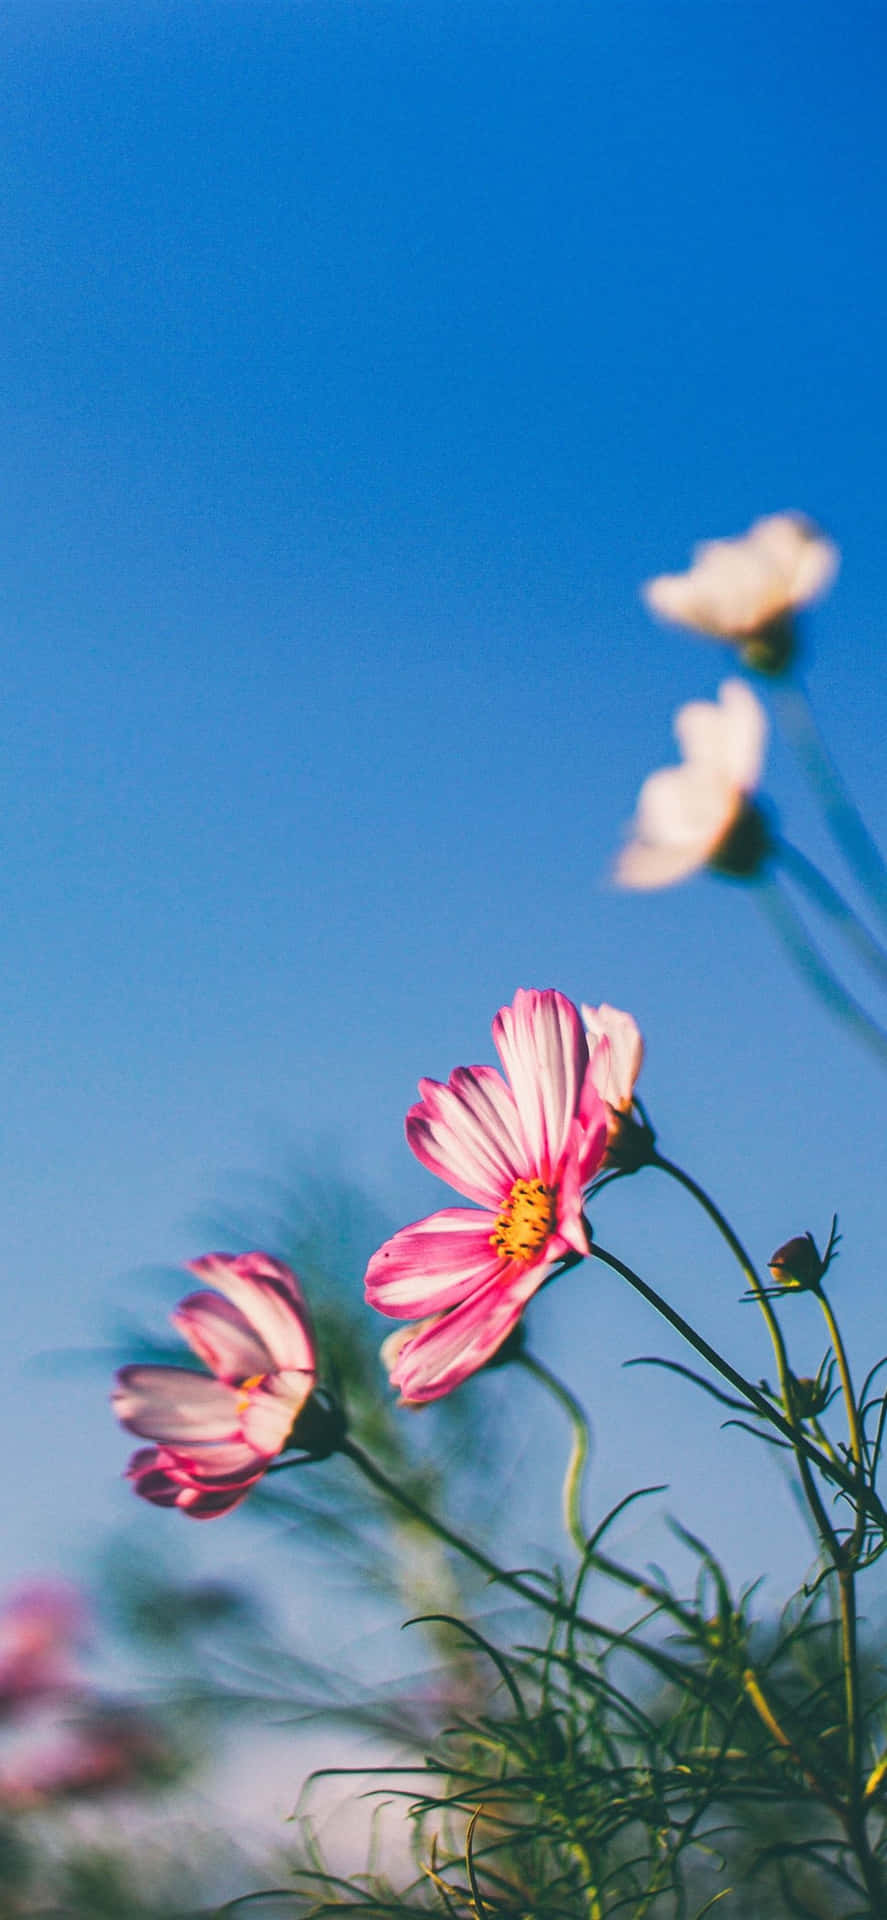 White and Pink Spring Daisy iPhone Wallpaper